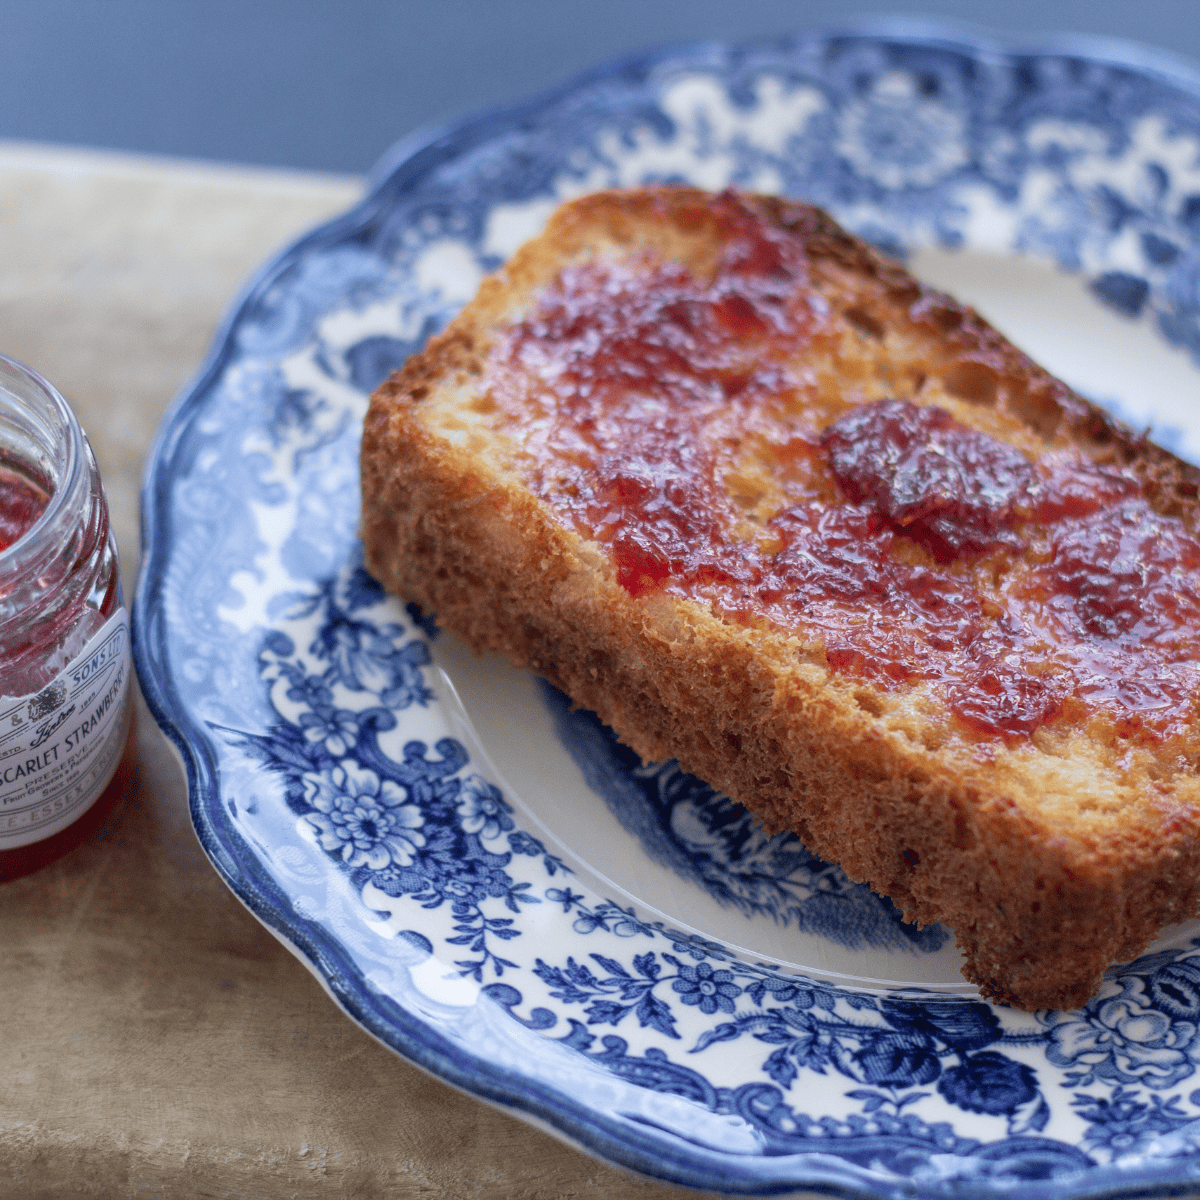 A slice of muffin bread with jam.